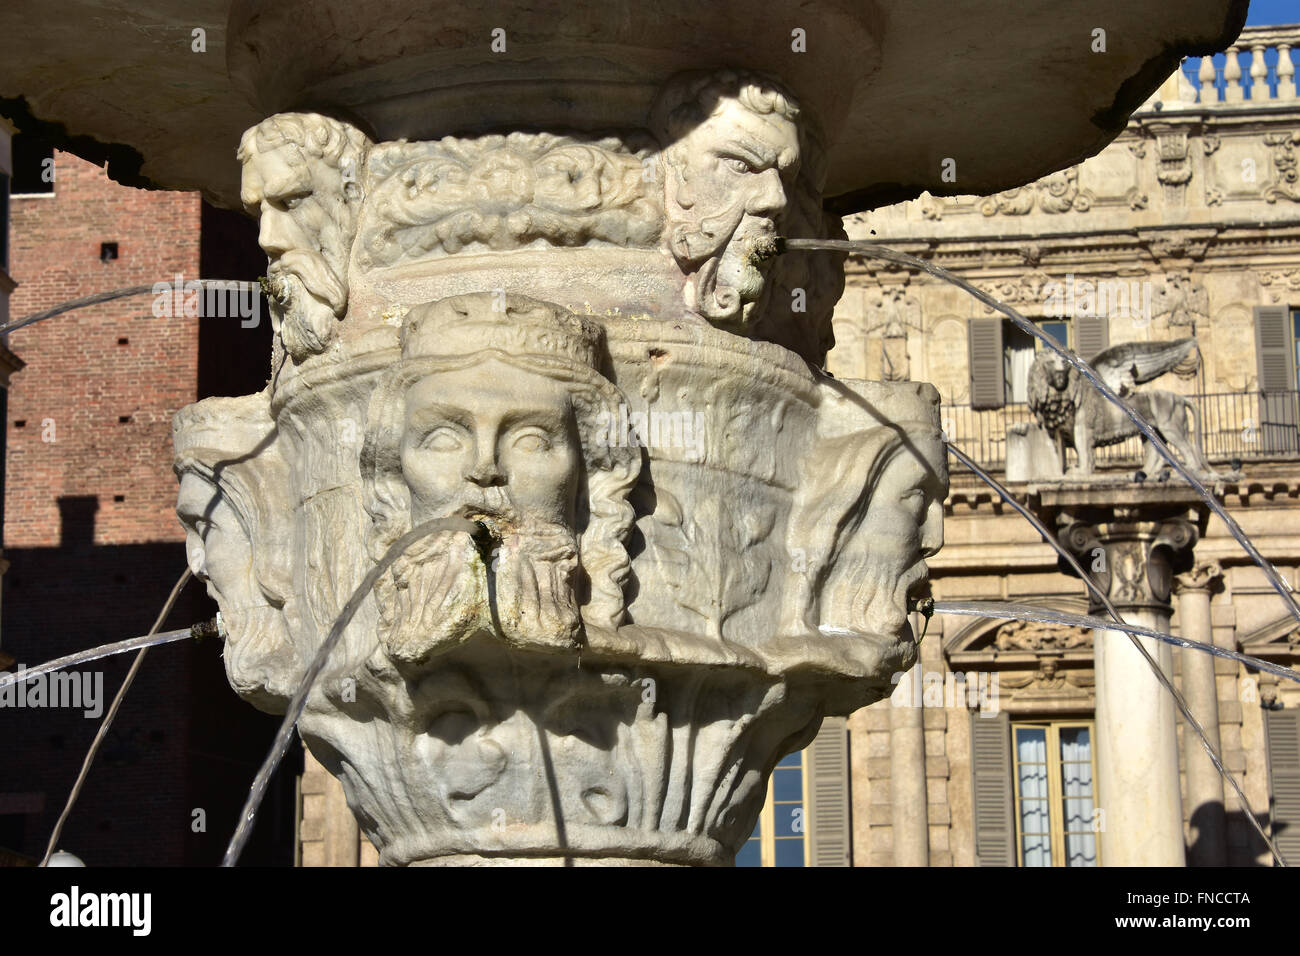 Detail from the ancient Fountain of Madonna Verona, in the center of Piazza delle Erbe square, with Venice Lion in the backgroun Stock Photo